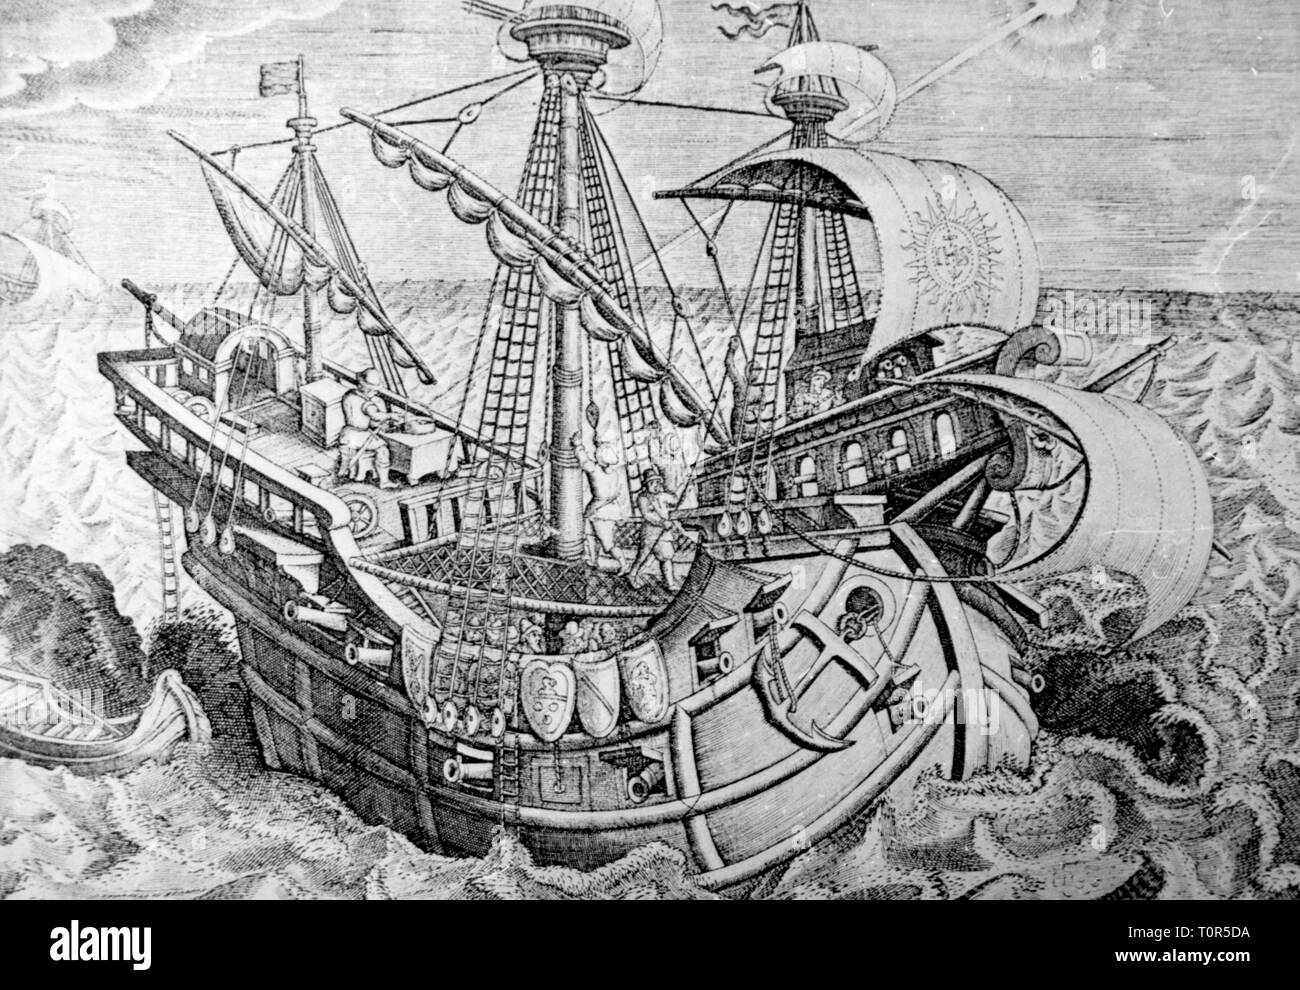 transport / transportation, navigation, sailing ship, galleon, ship of Christopher Columbus, copper engraving by Theodor Galle after drawing by Giovanni Stradanus, 1620, Additional-Rights-Clearance-Info-Not-Available Stock Photo